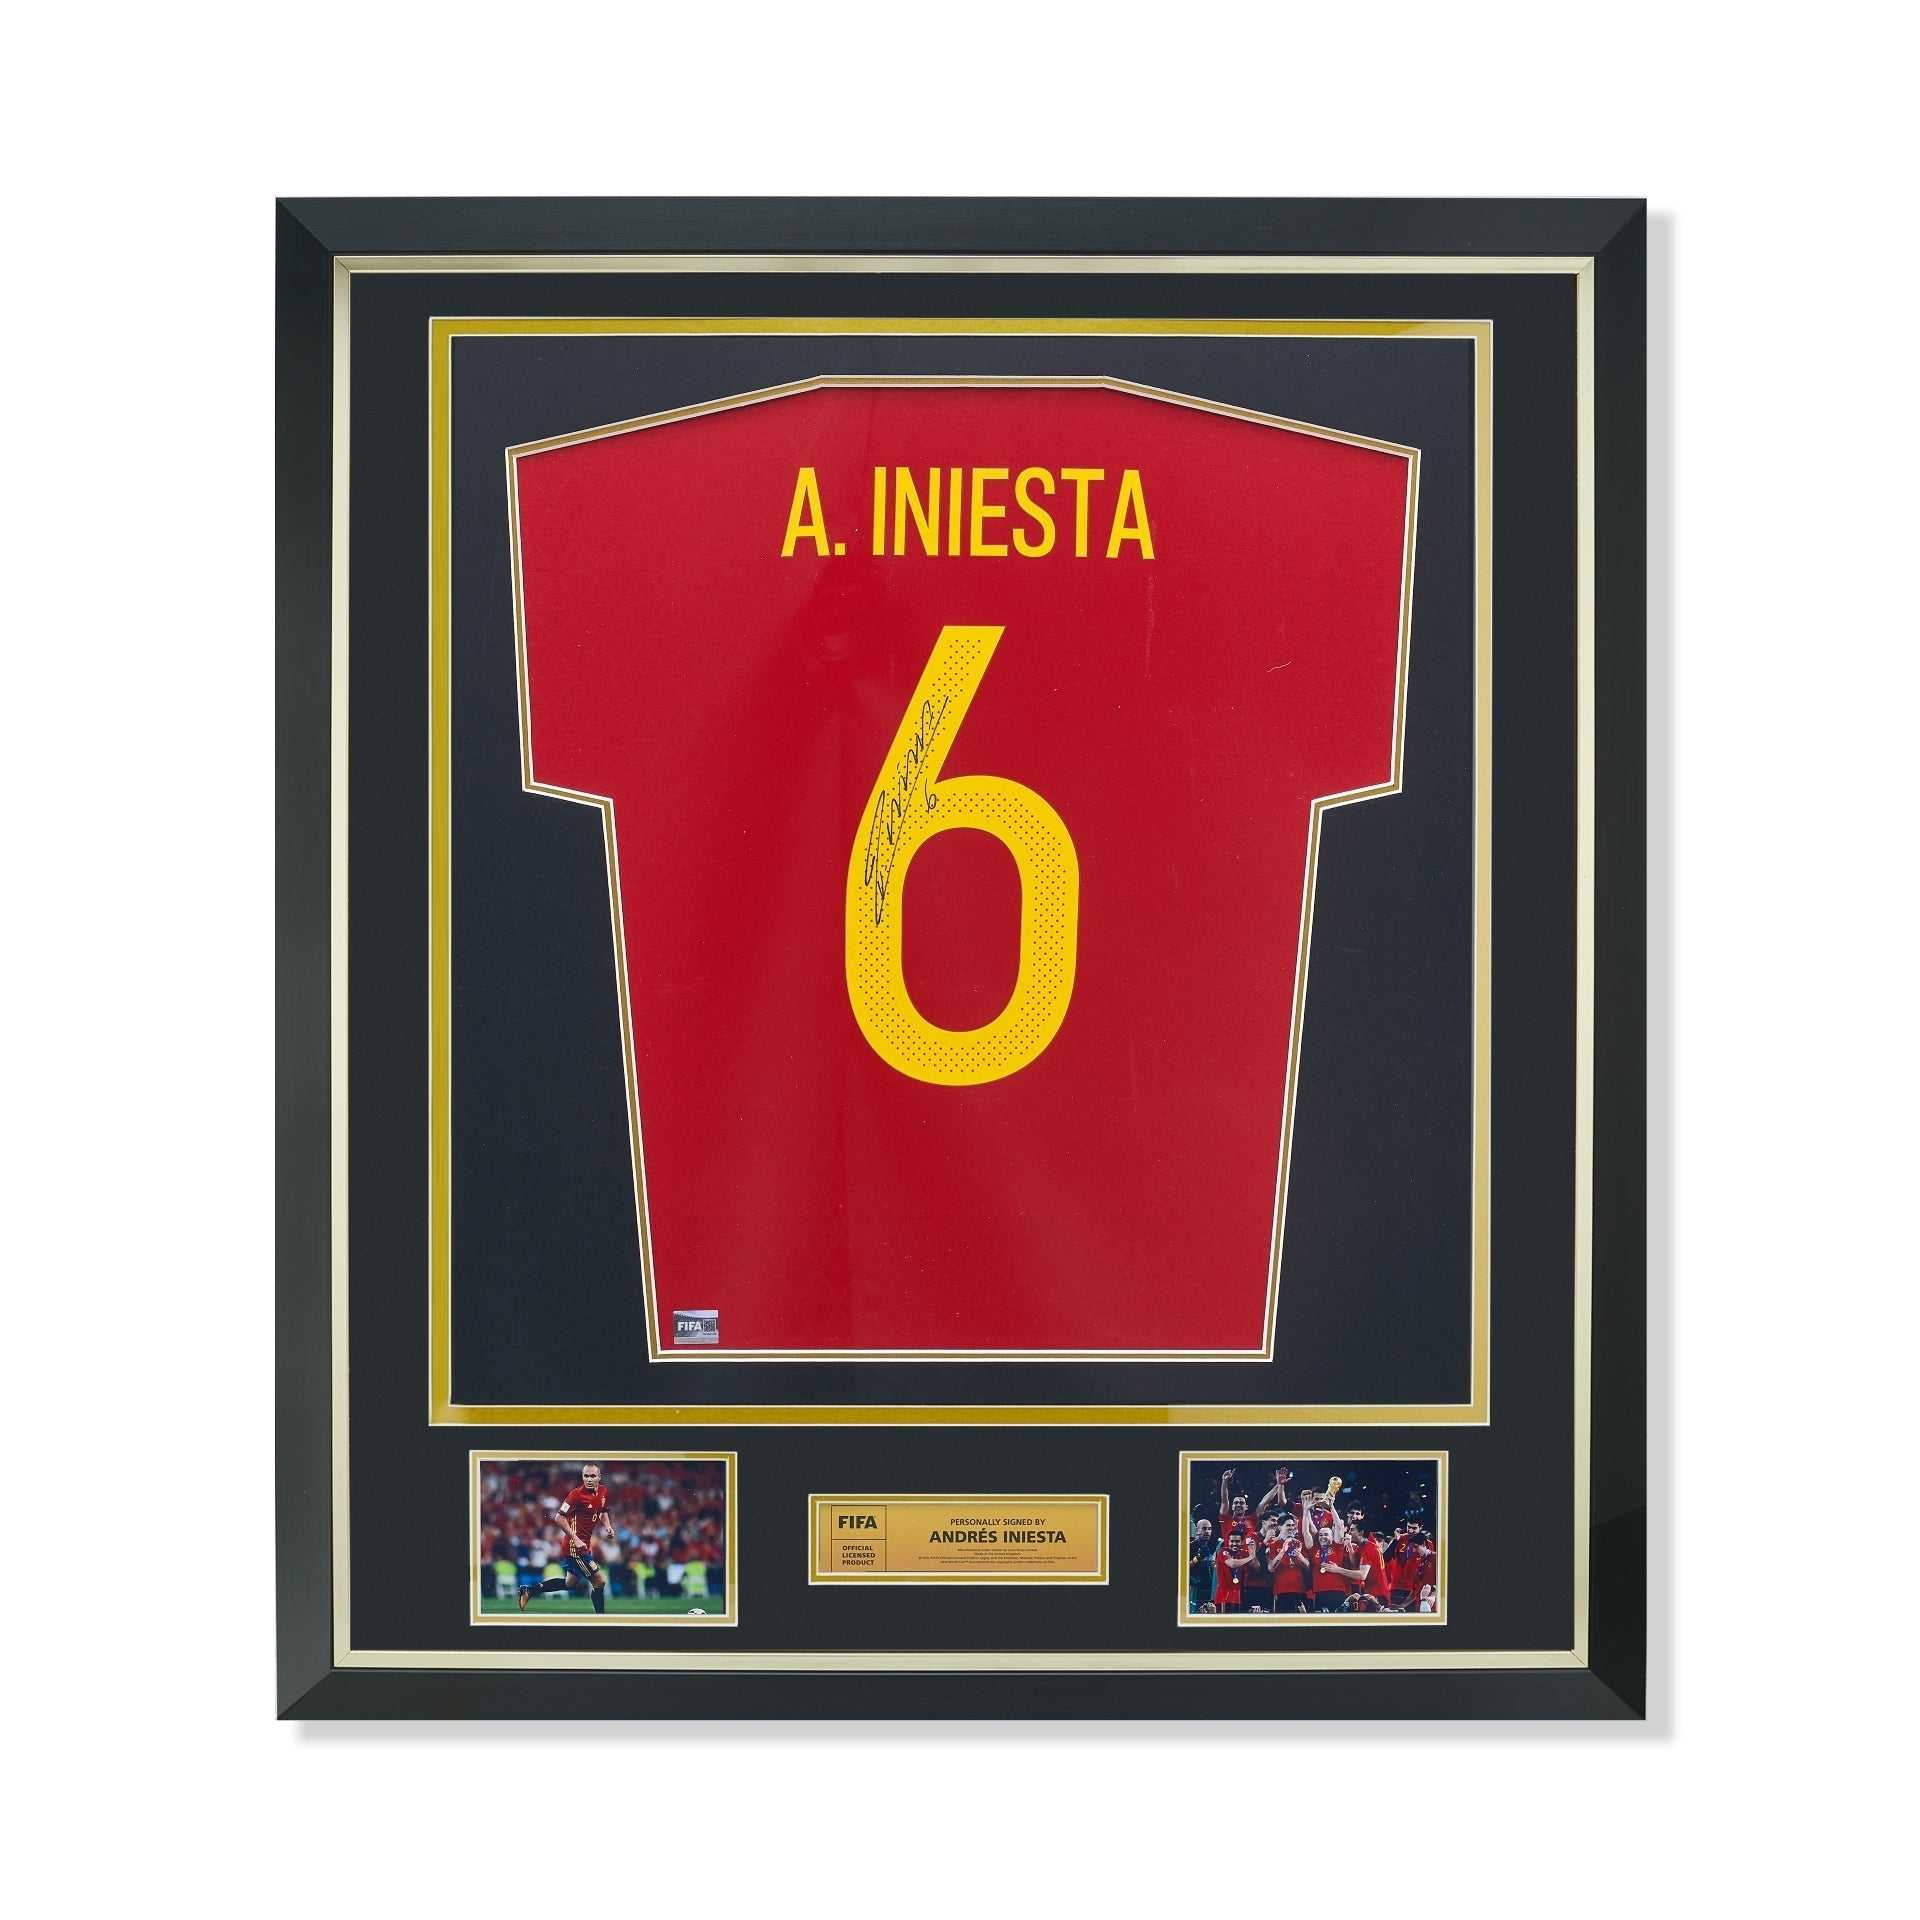 FIFA World Cup Andres Iniesta Official Signed And Framed Spain 2016-17 Home Shirt